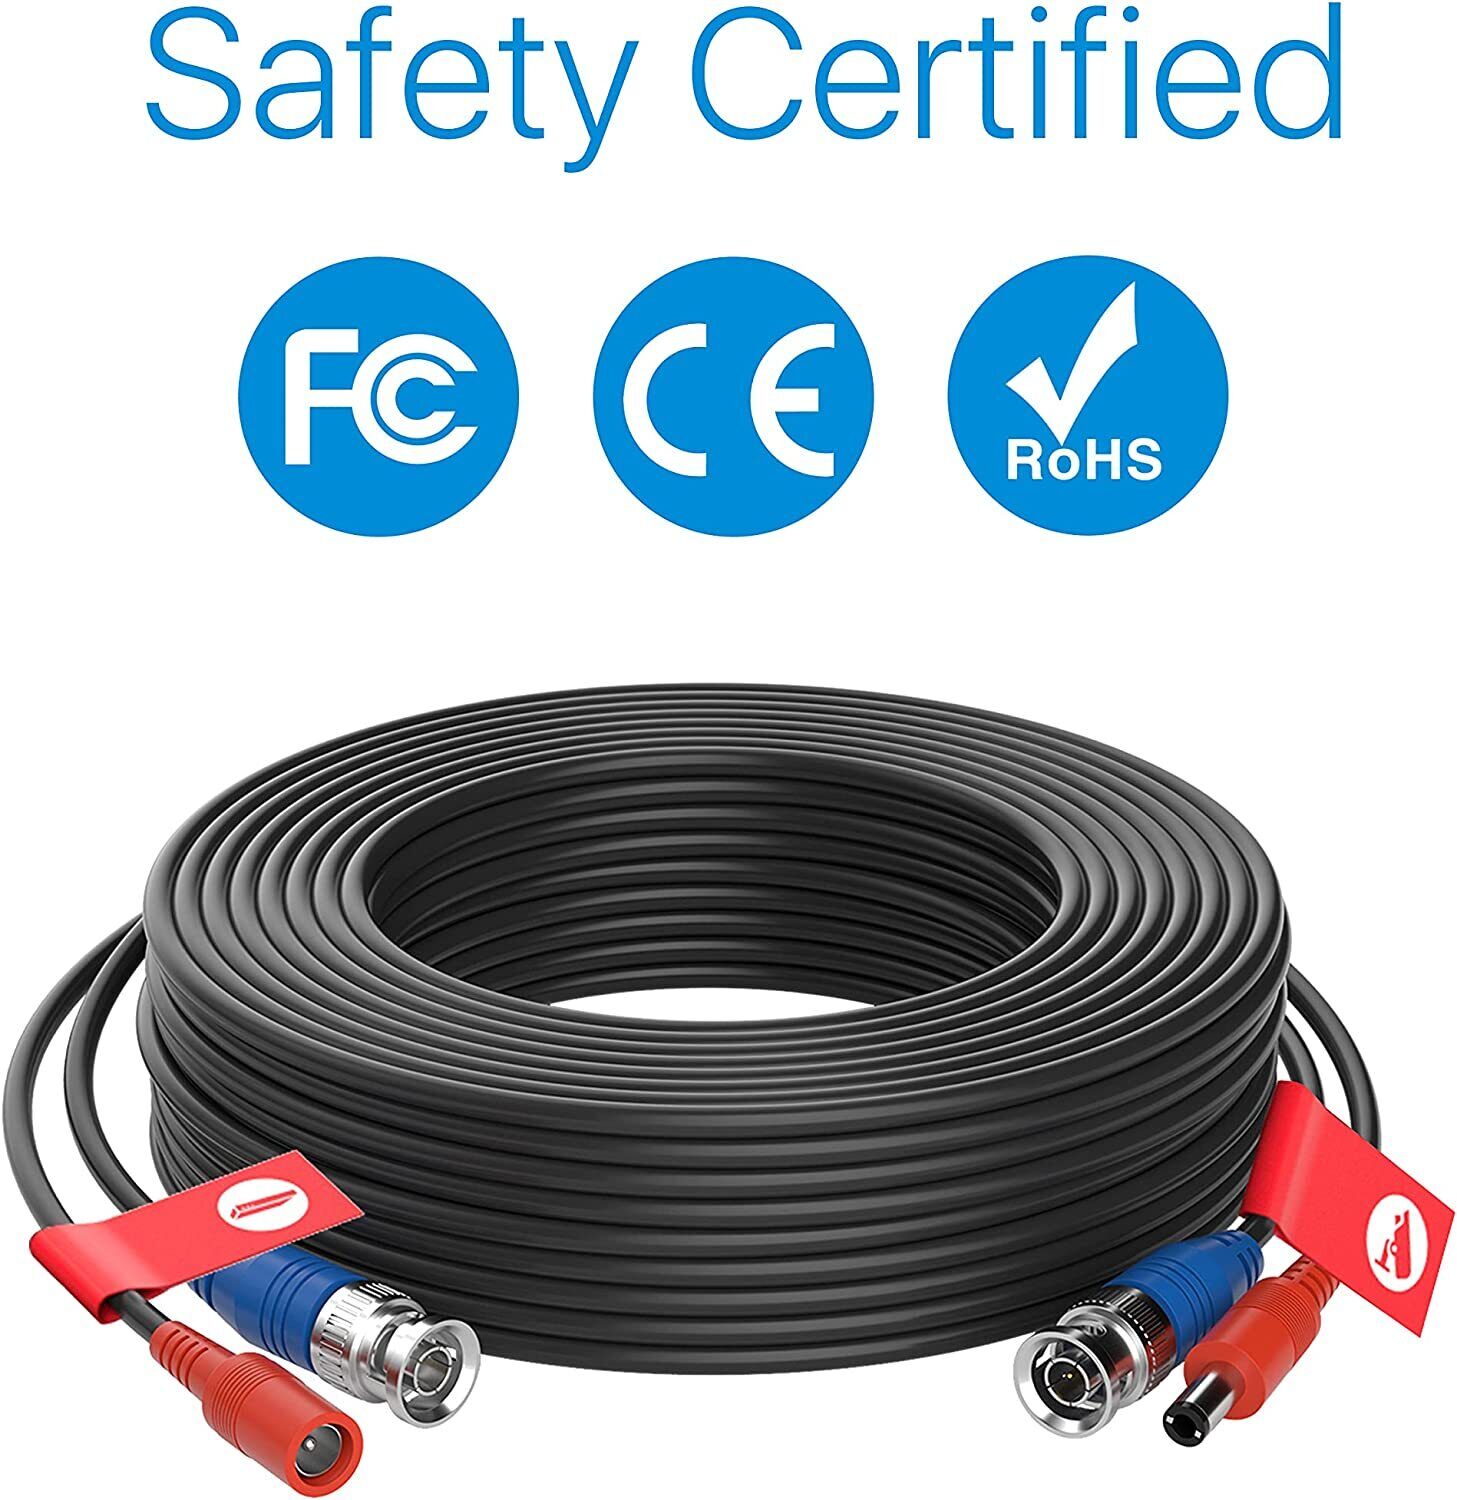 ZOSI 4 x60ft 18M Video BNC Power Cable RCA Cord Wire for Security Camera System ZOSI Does Not Apply - фотография #2